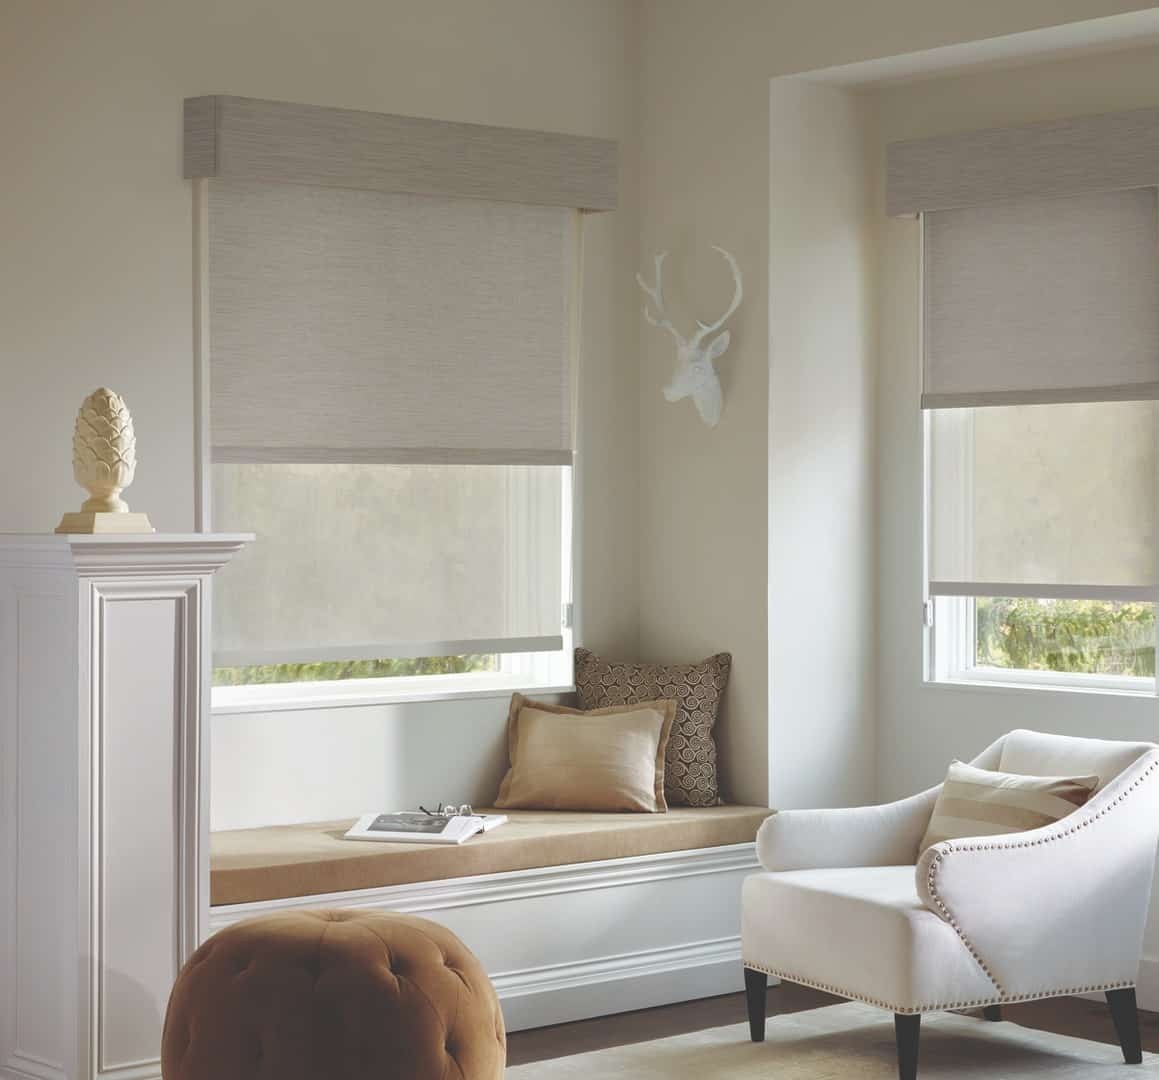 The Benefits of Roller and Solar Shades near Grand Rapids, Michigan (MI) including modern designs.